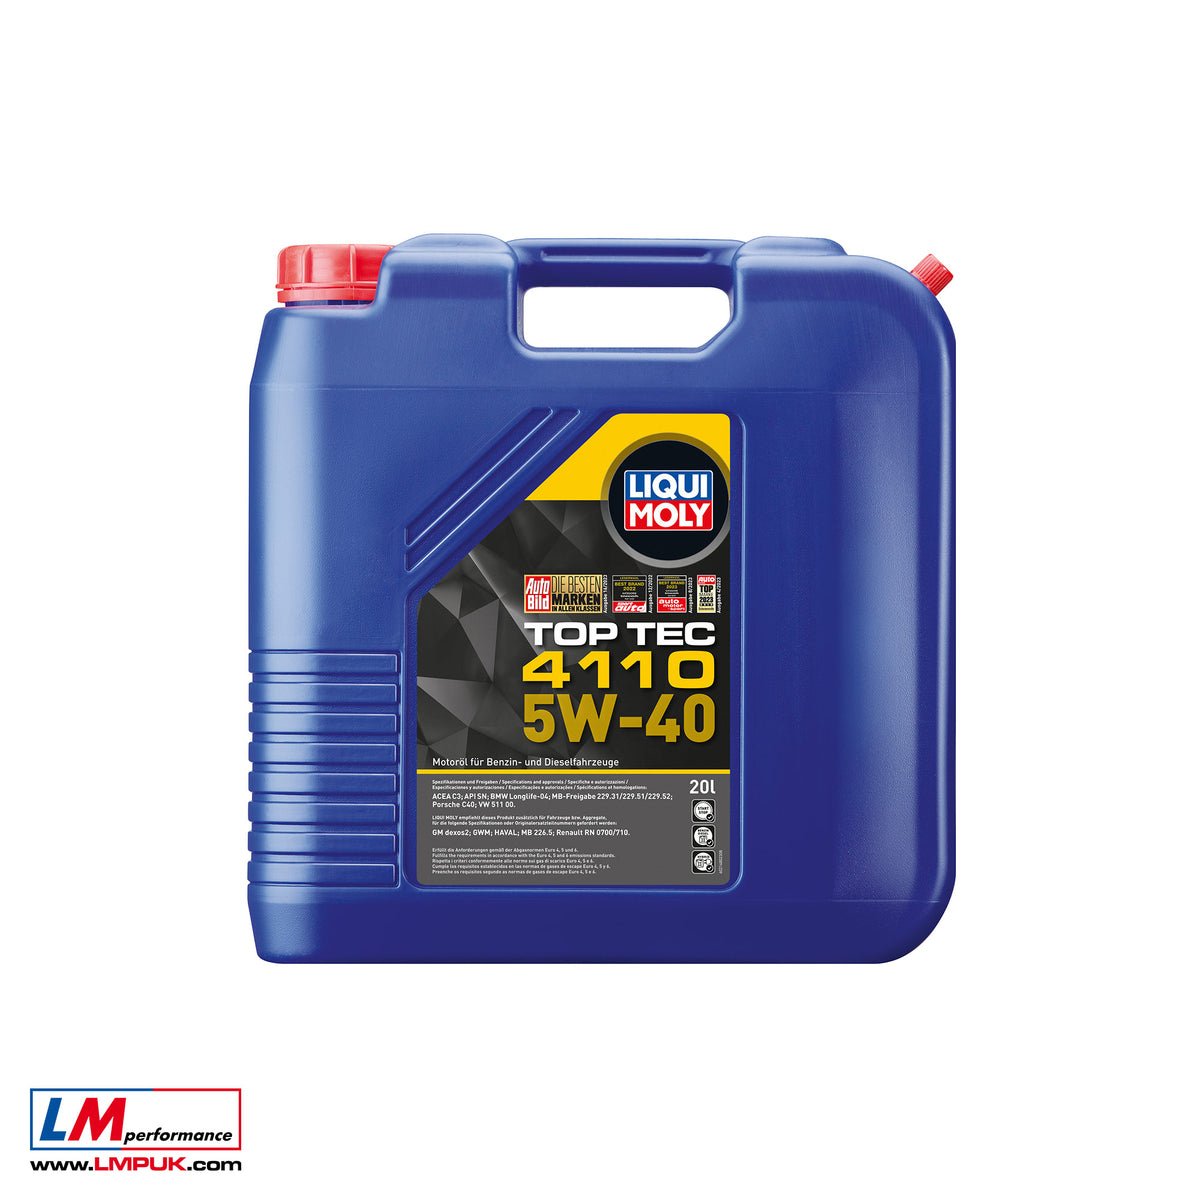 Top Tec 4110 5W-40 Engine Oil by LIQUI MOLY – LM Performance